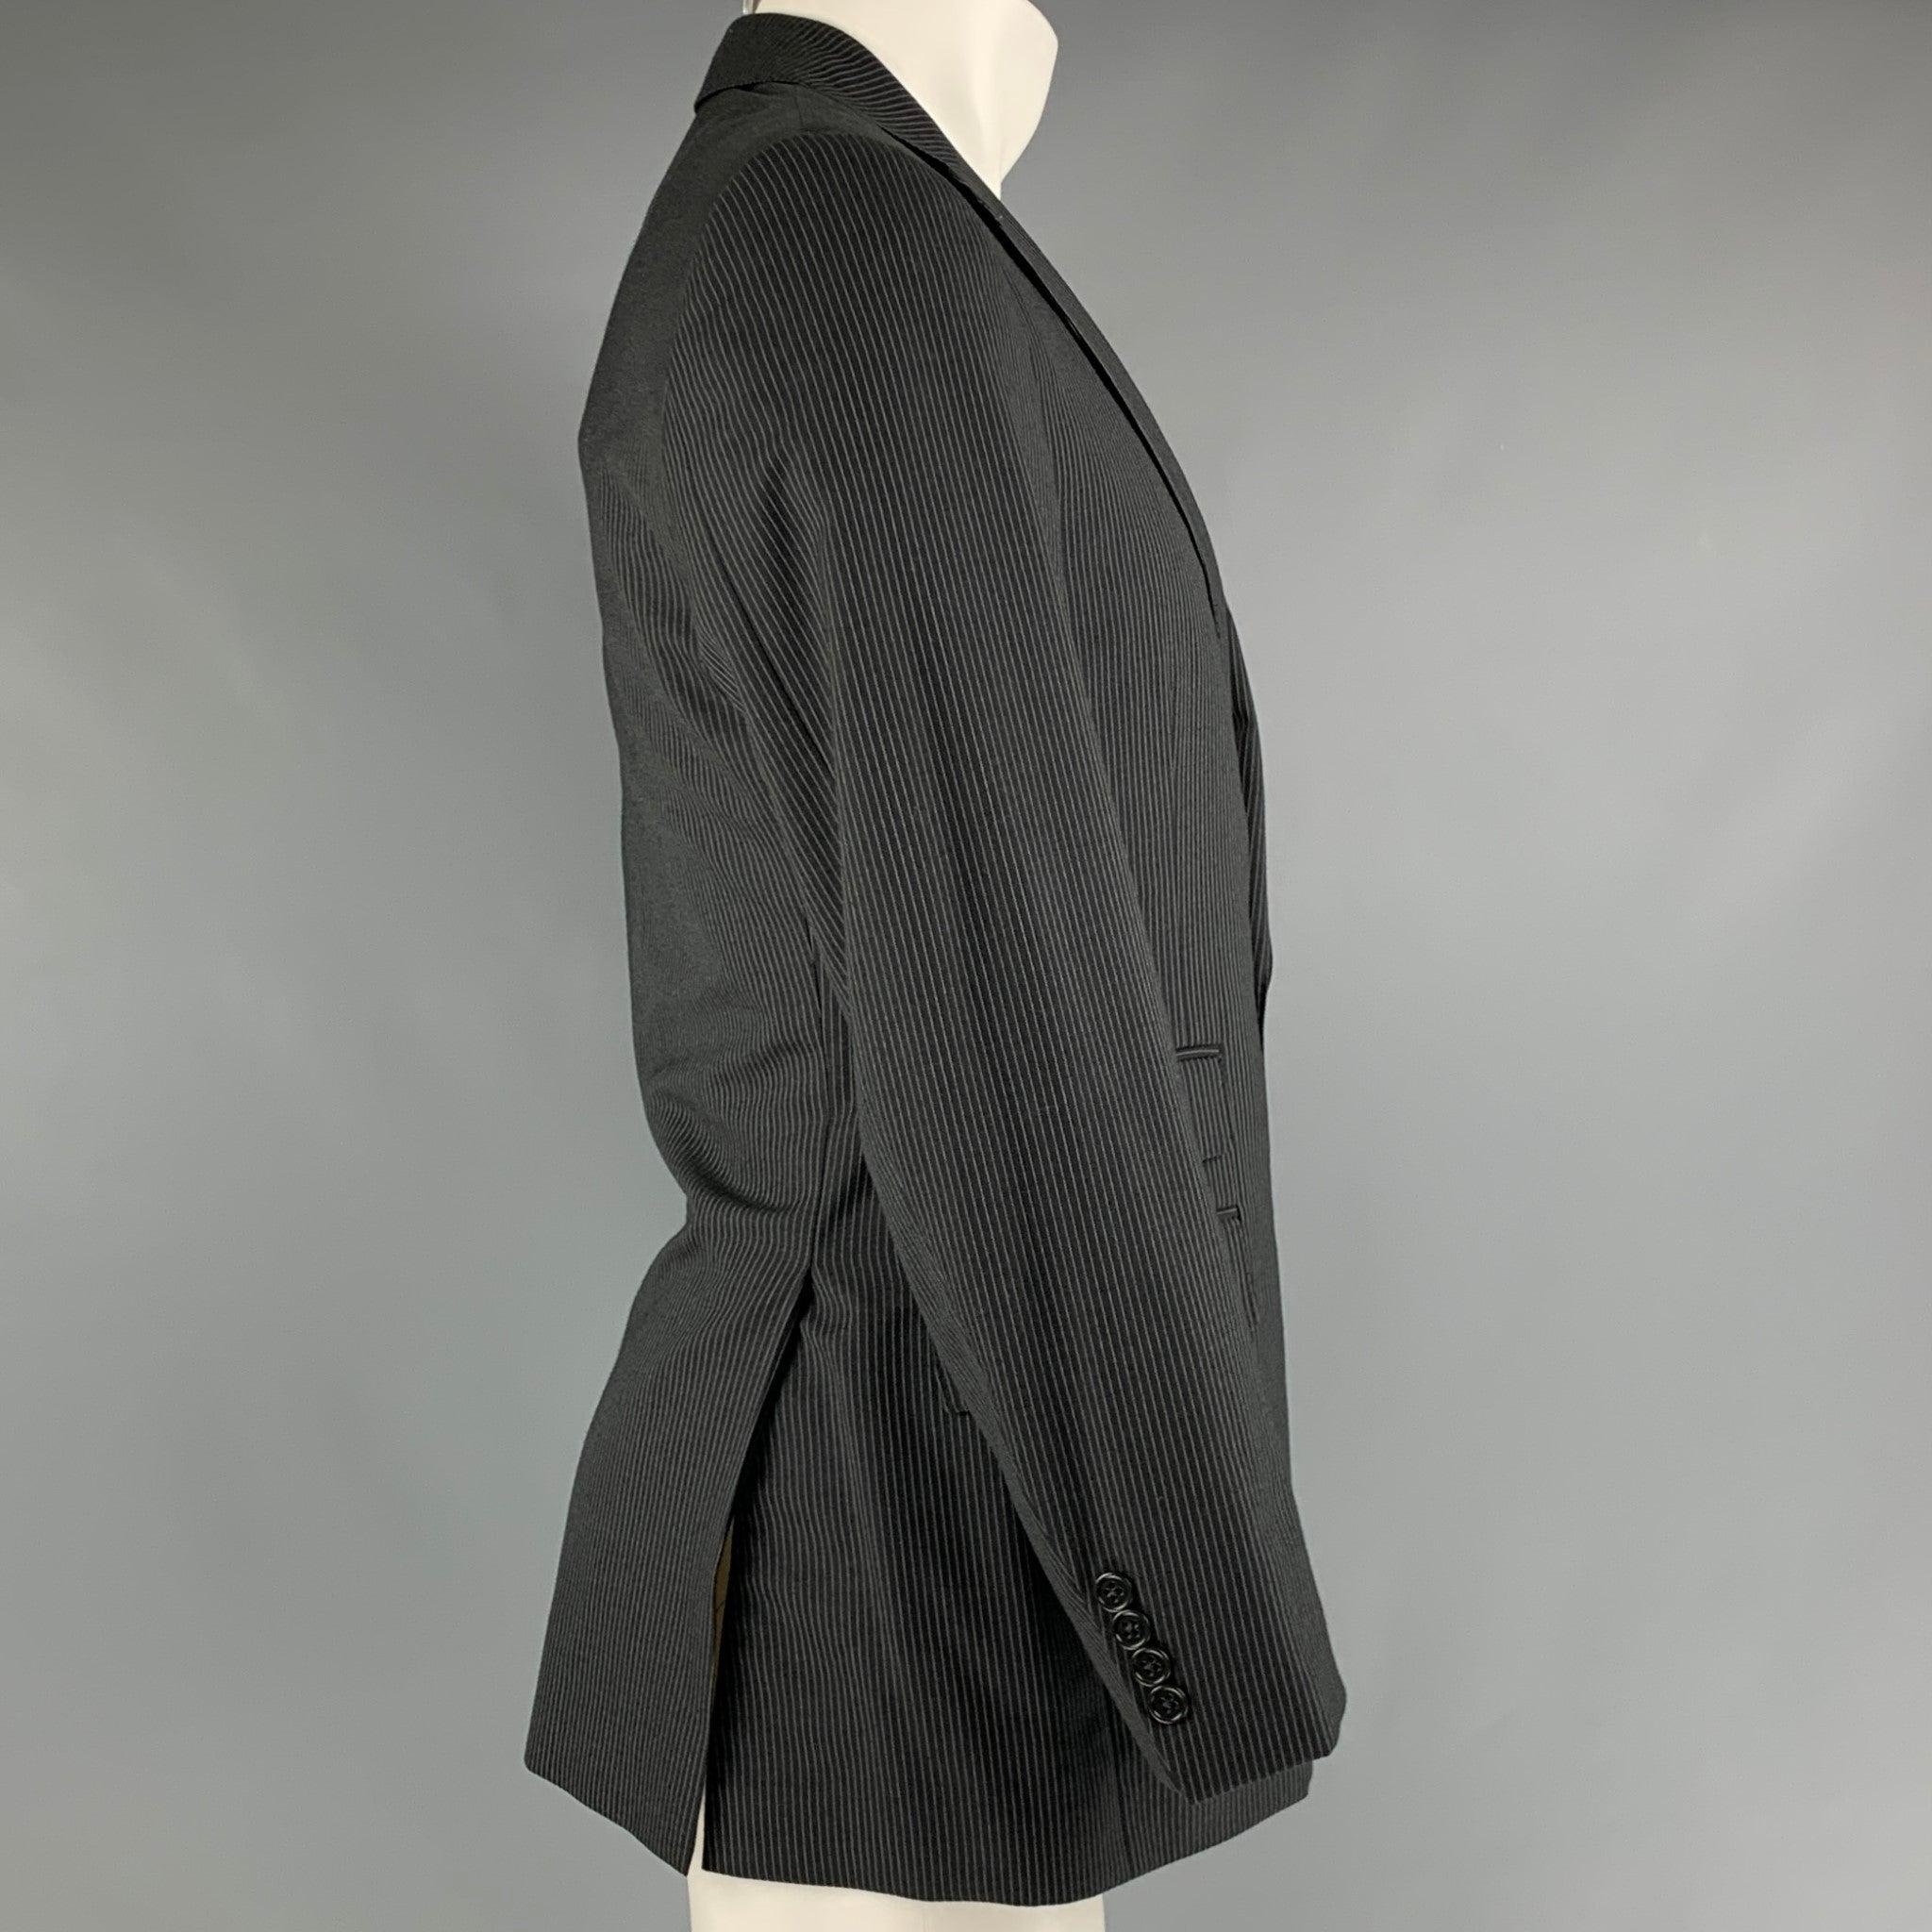 RALPH LAUREN PURPLE LABEL
sport coat in a black and grey pinstripe wool featuring a notch lapel, flap pockets, double back vent, and a double button closure. Handmade in Italy. Very Good Pre-Owned Condition. 

Marked:   38 R 

Measurements: 
